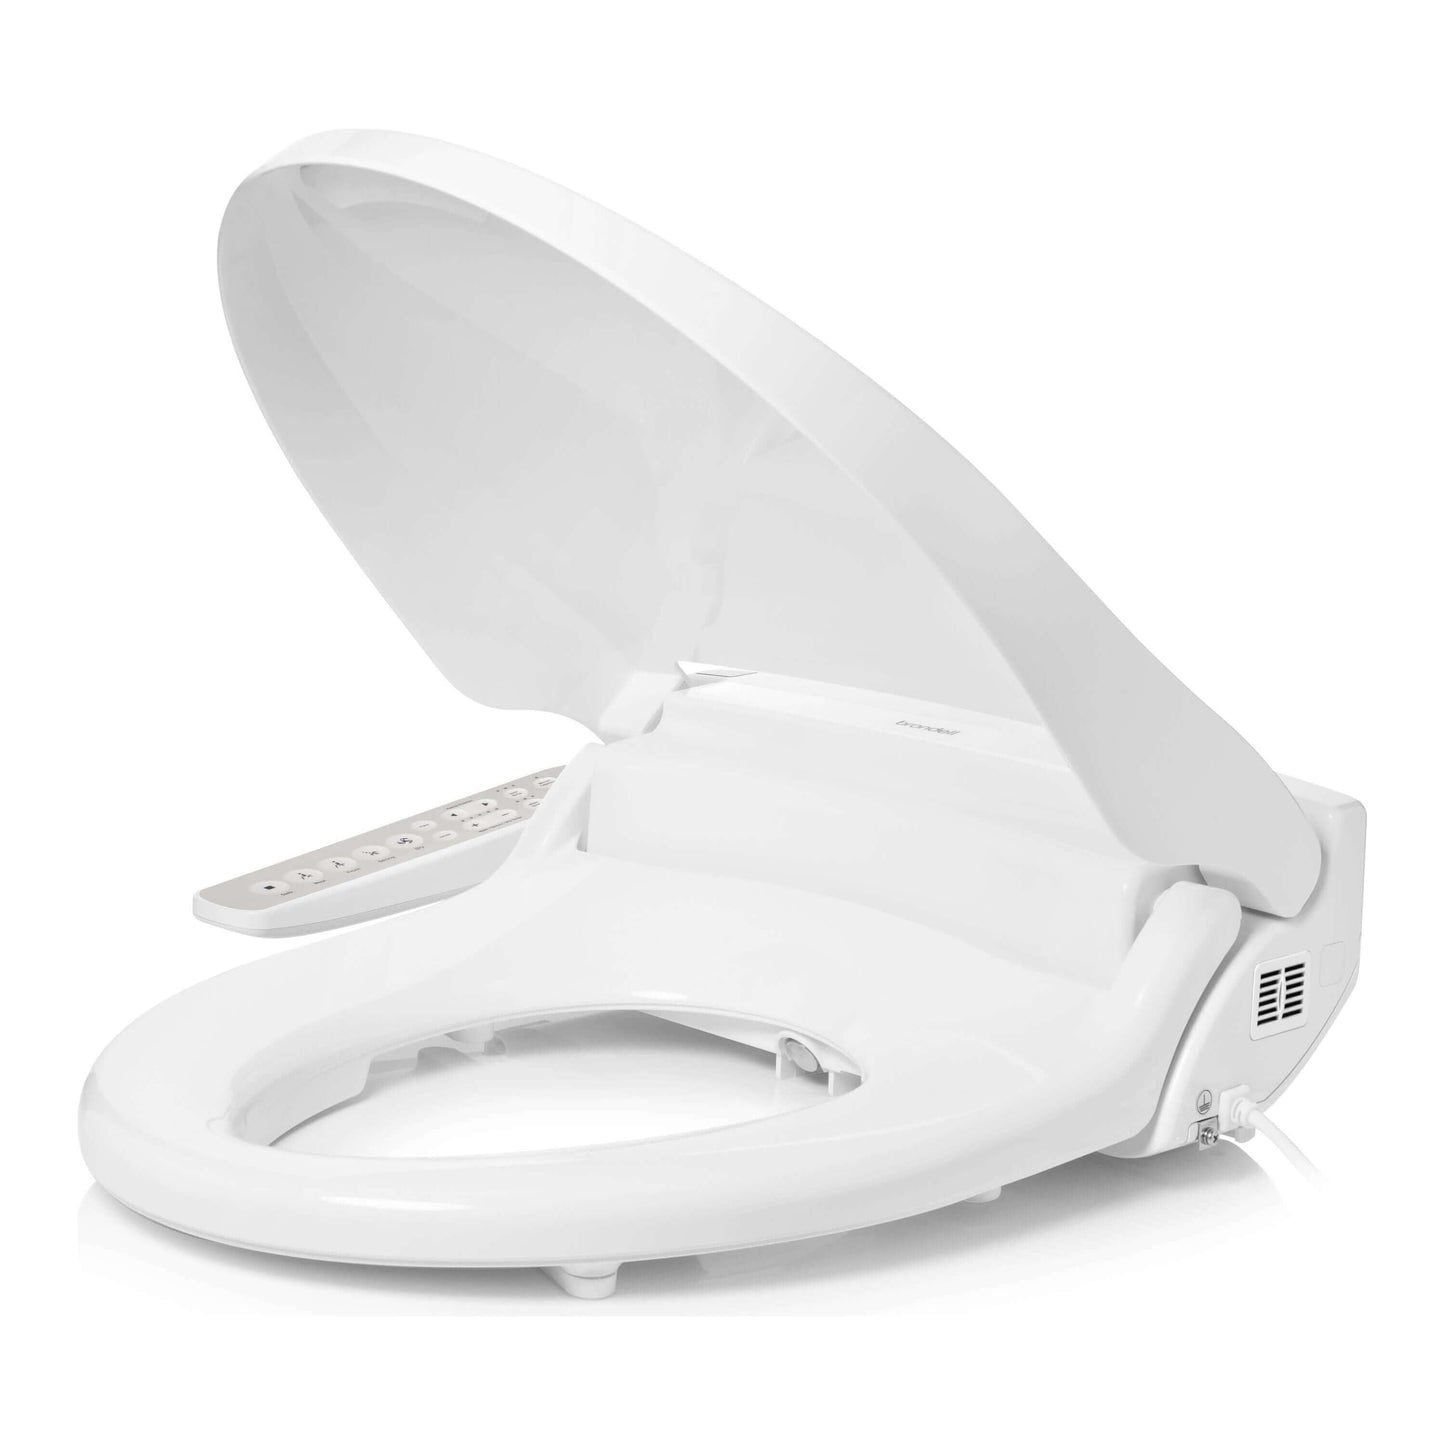 Swash Select DR801 Bidet Seat - side angled view with lid ajar